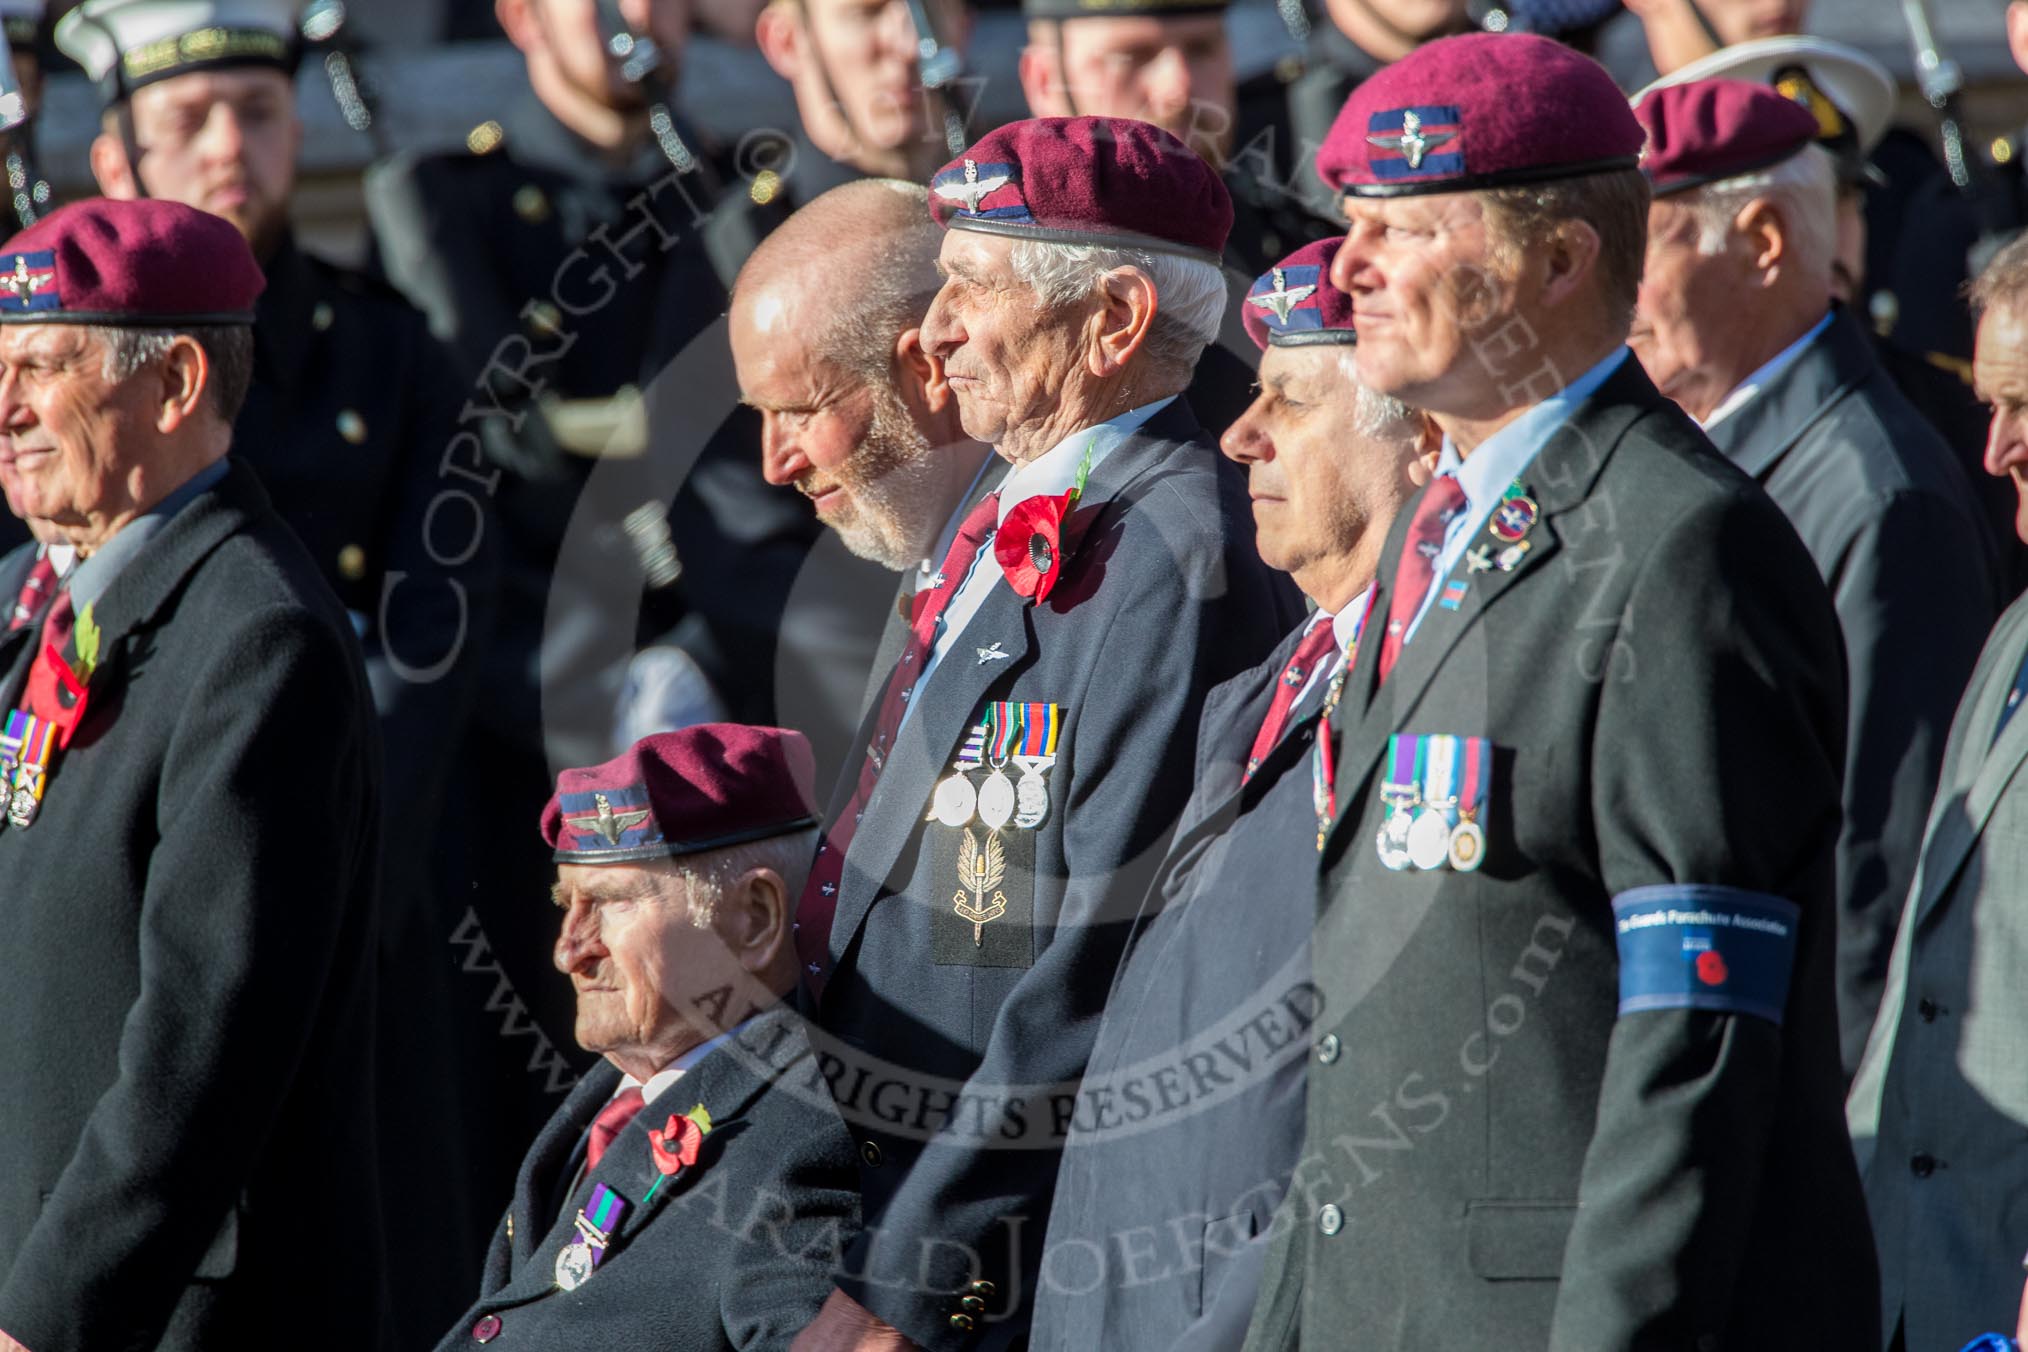 Guards Parachute Association (Group A20, 24 members) during the Royal British Legion March Past on Remembrance Sunday at the Cenotaph, Whitehall, Westminster, London, 11 November 2018, 11:59.